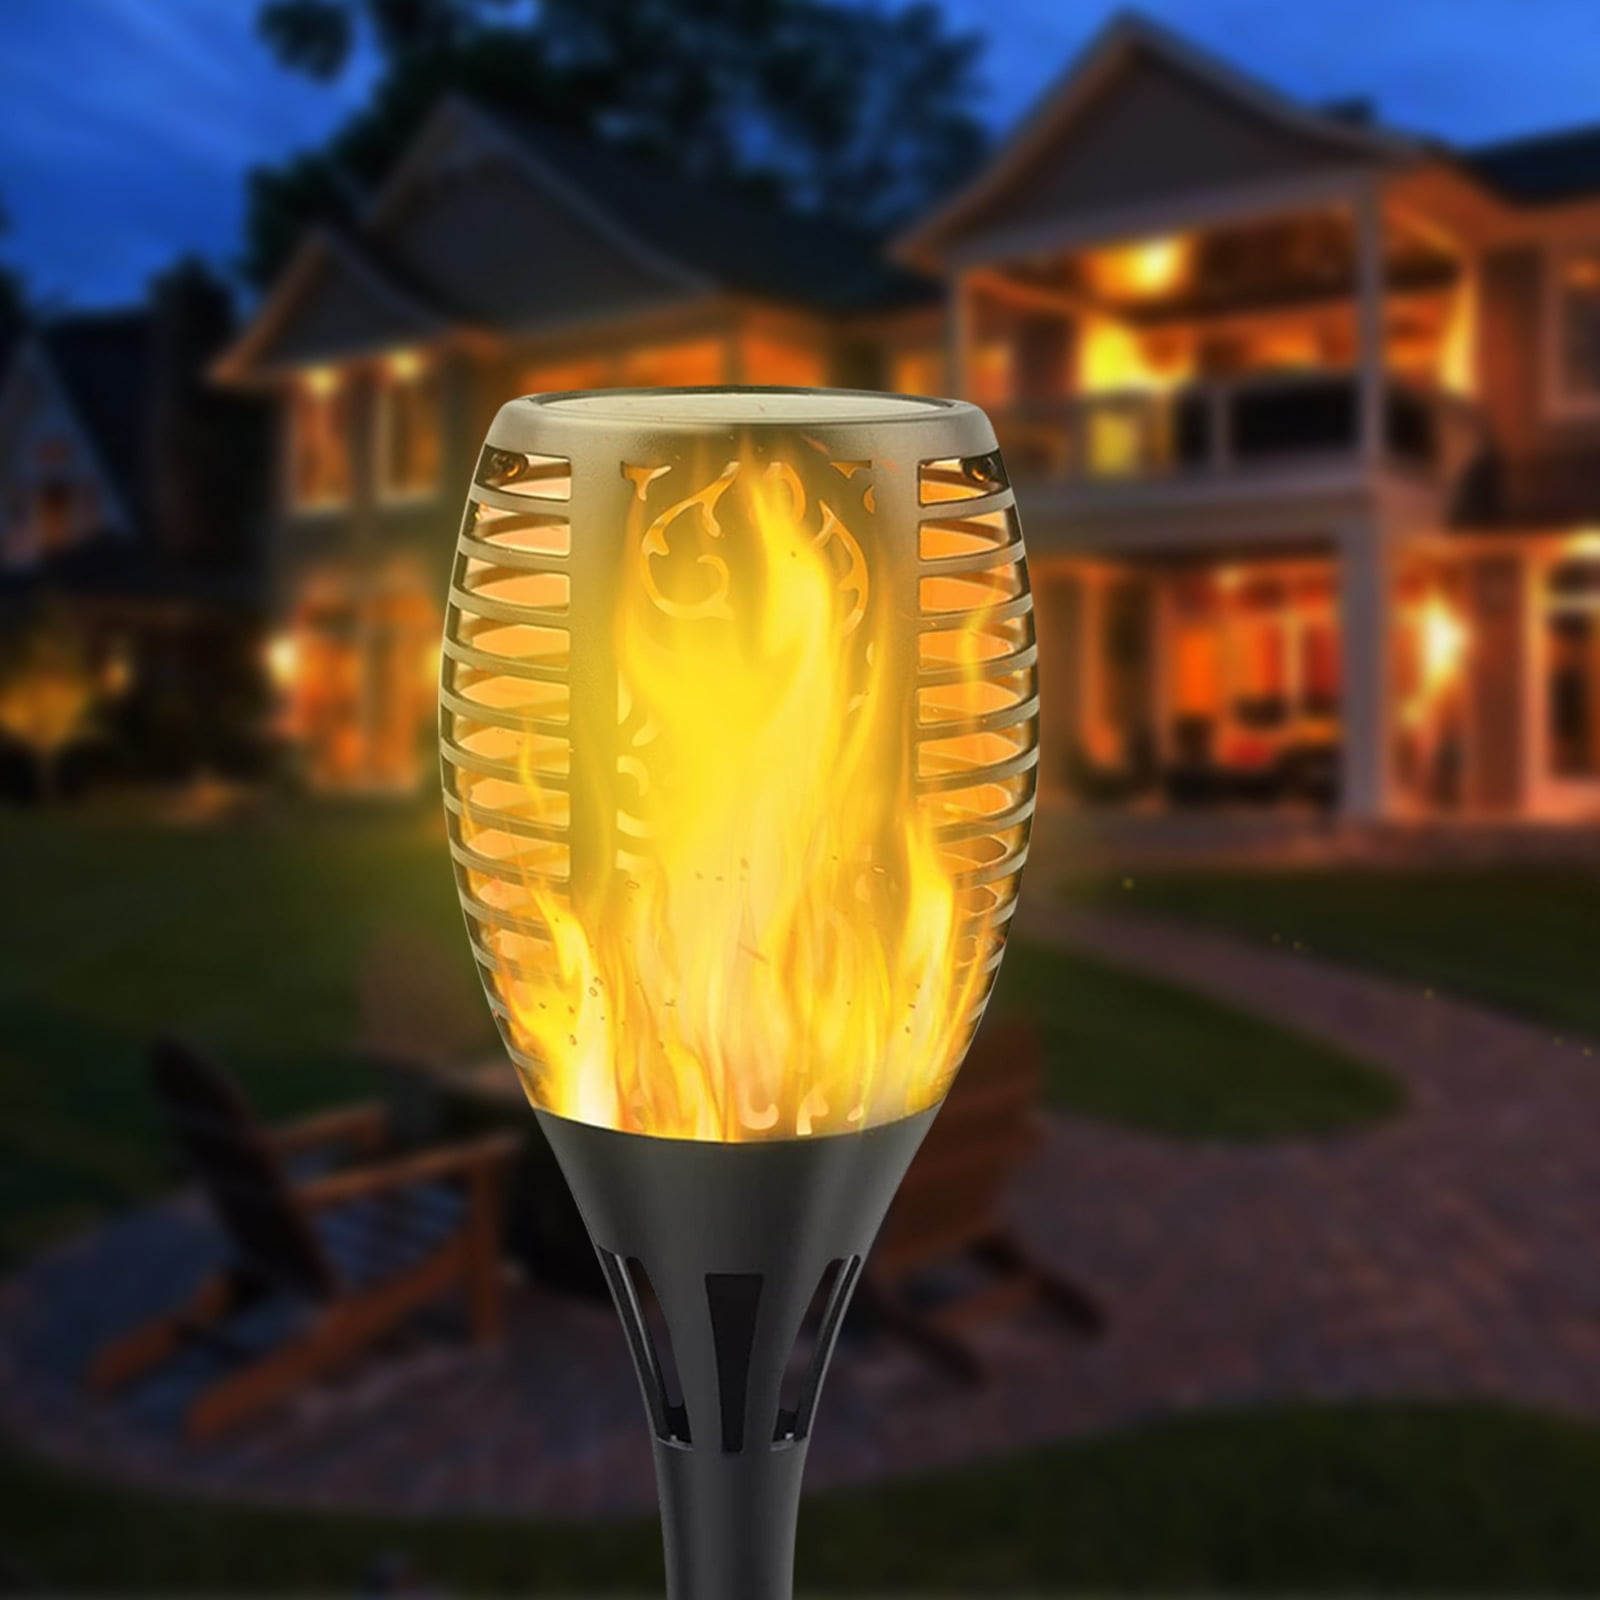 Landscape Solar Torch Lights,YULAMP Waterproof Flickering Flames Torches Lights Outdoor Solar Flame Light Decoration Lighting Dusk to Dawn Auto On/Off Security Torch Light for Deck Yard Driveway 2Pack 